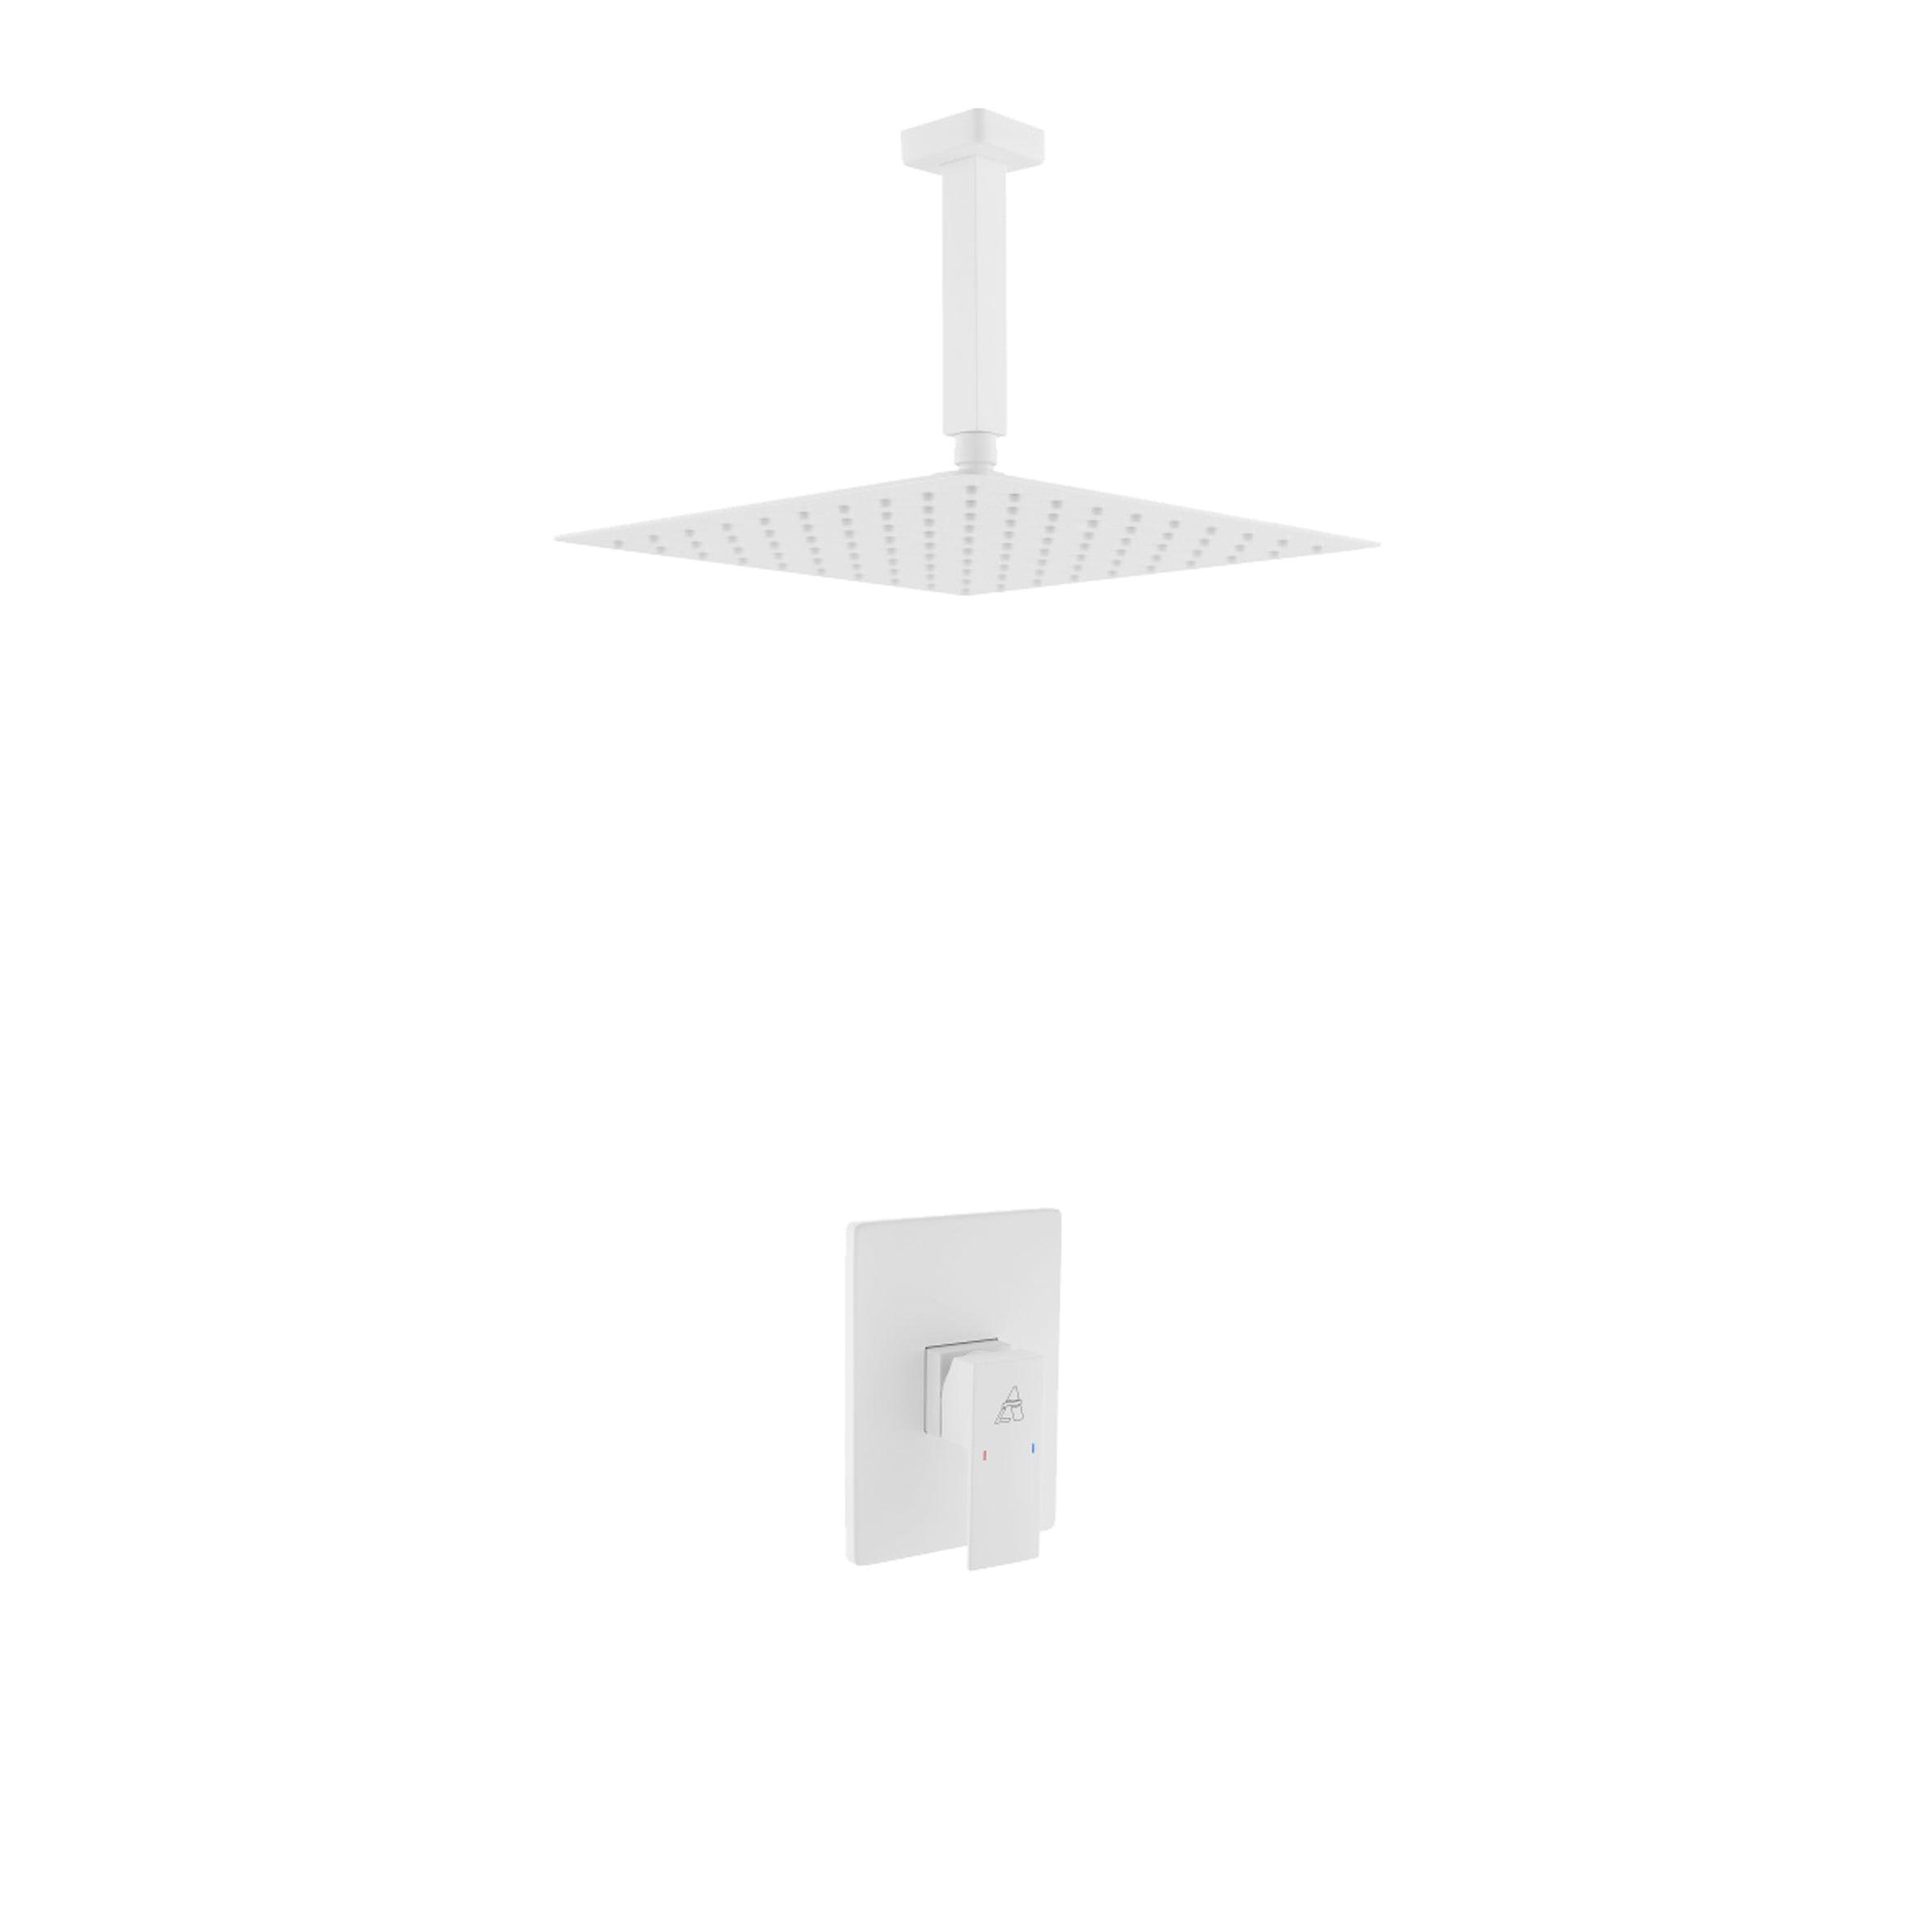 Aqua Piazza Shower Set with Ceiling Mount Square Rain Shower - Home and Bath Depot